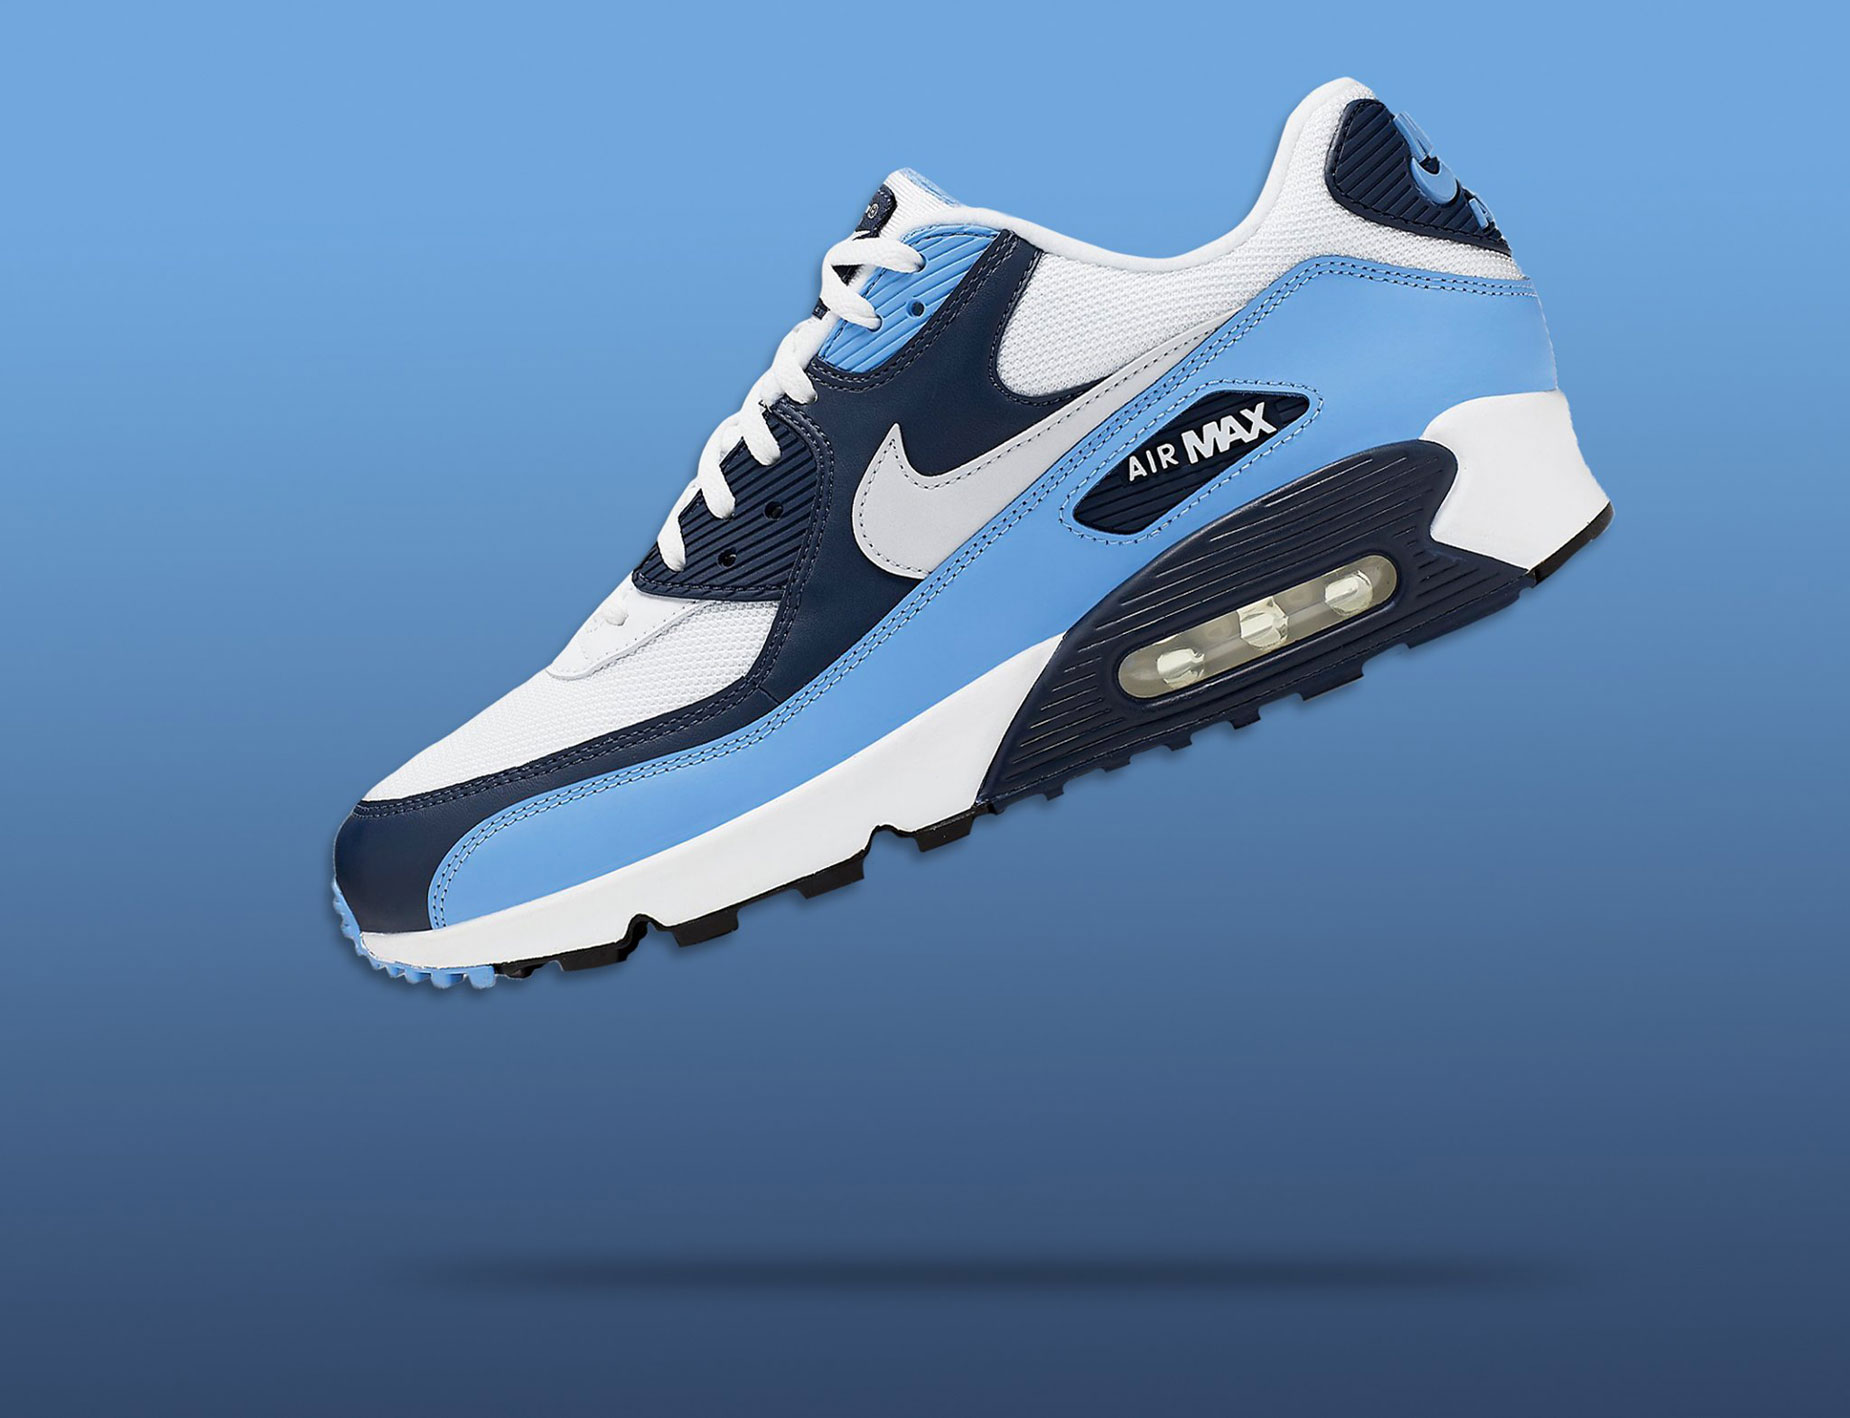 Nike Air Max 90 UNC University Blue Available Now | SneakerFits.com